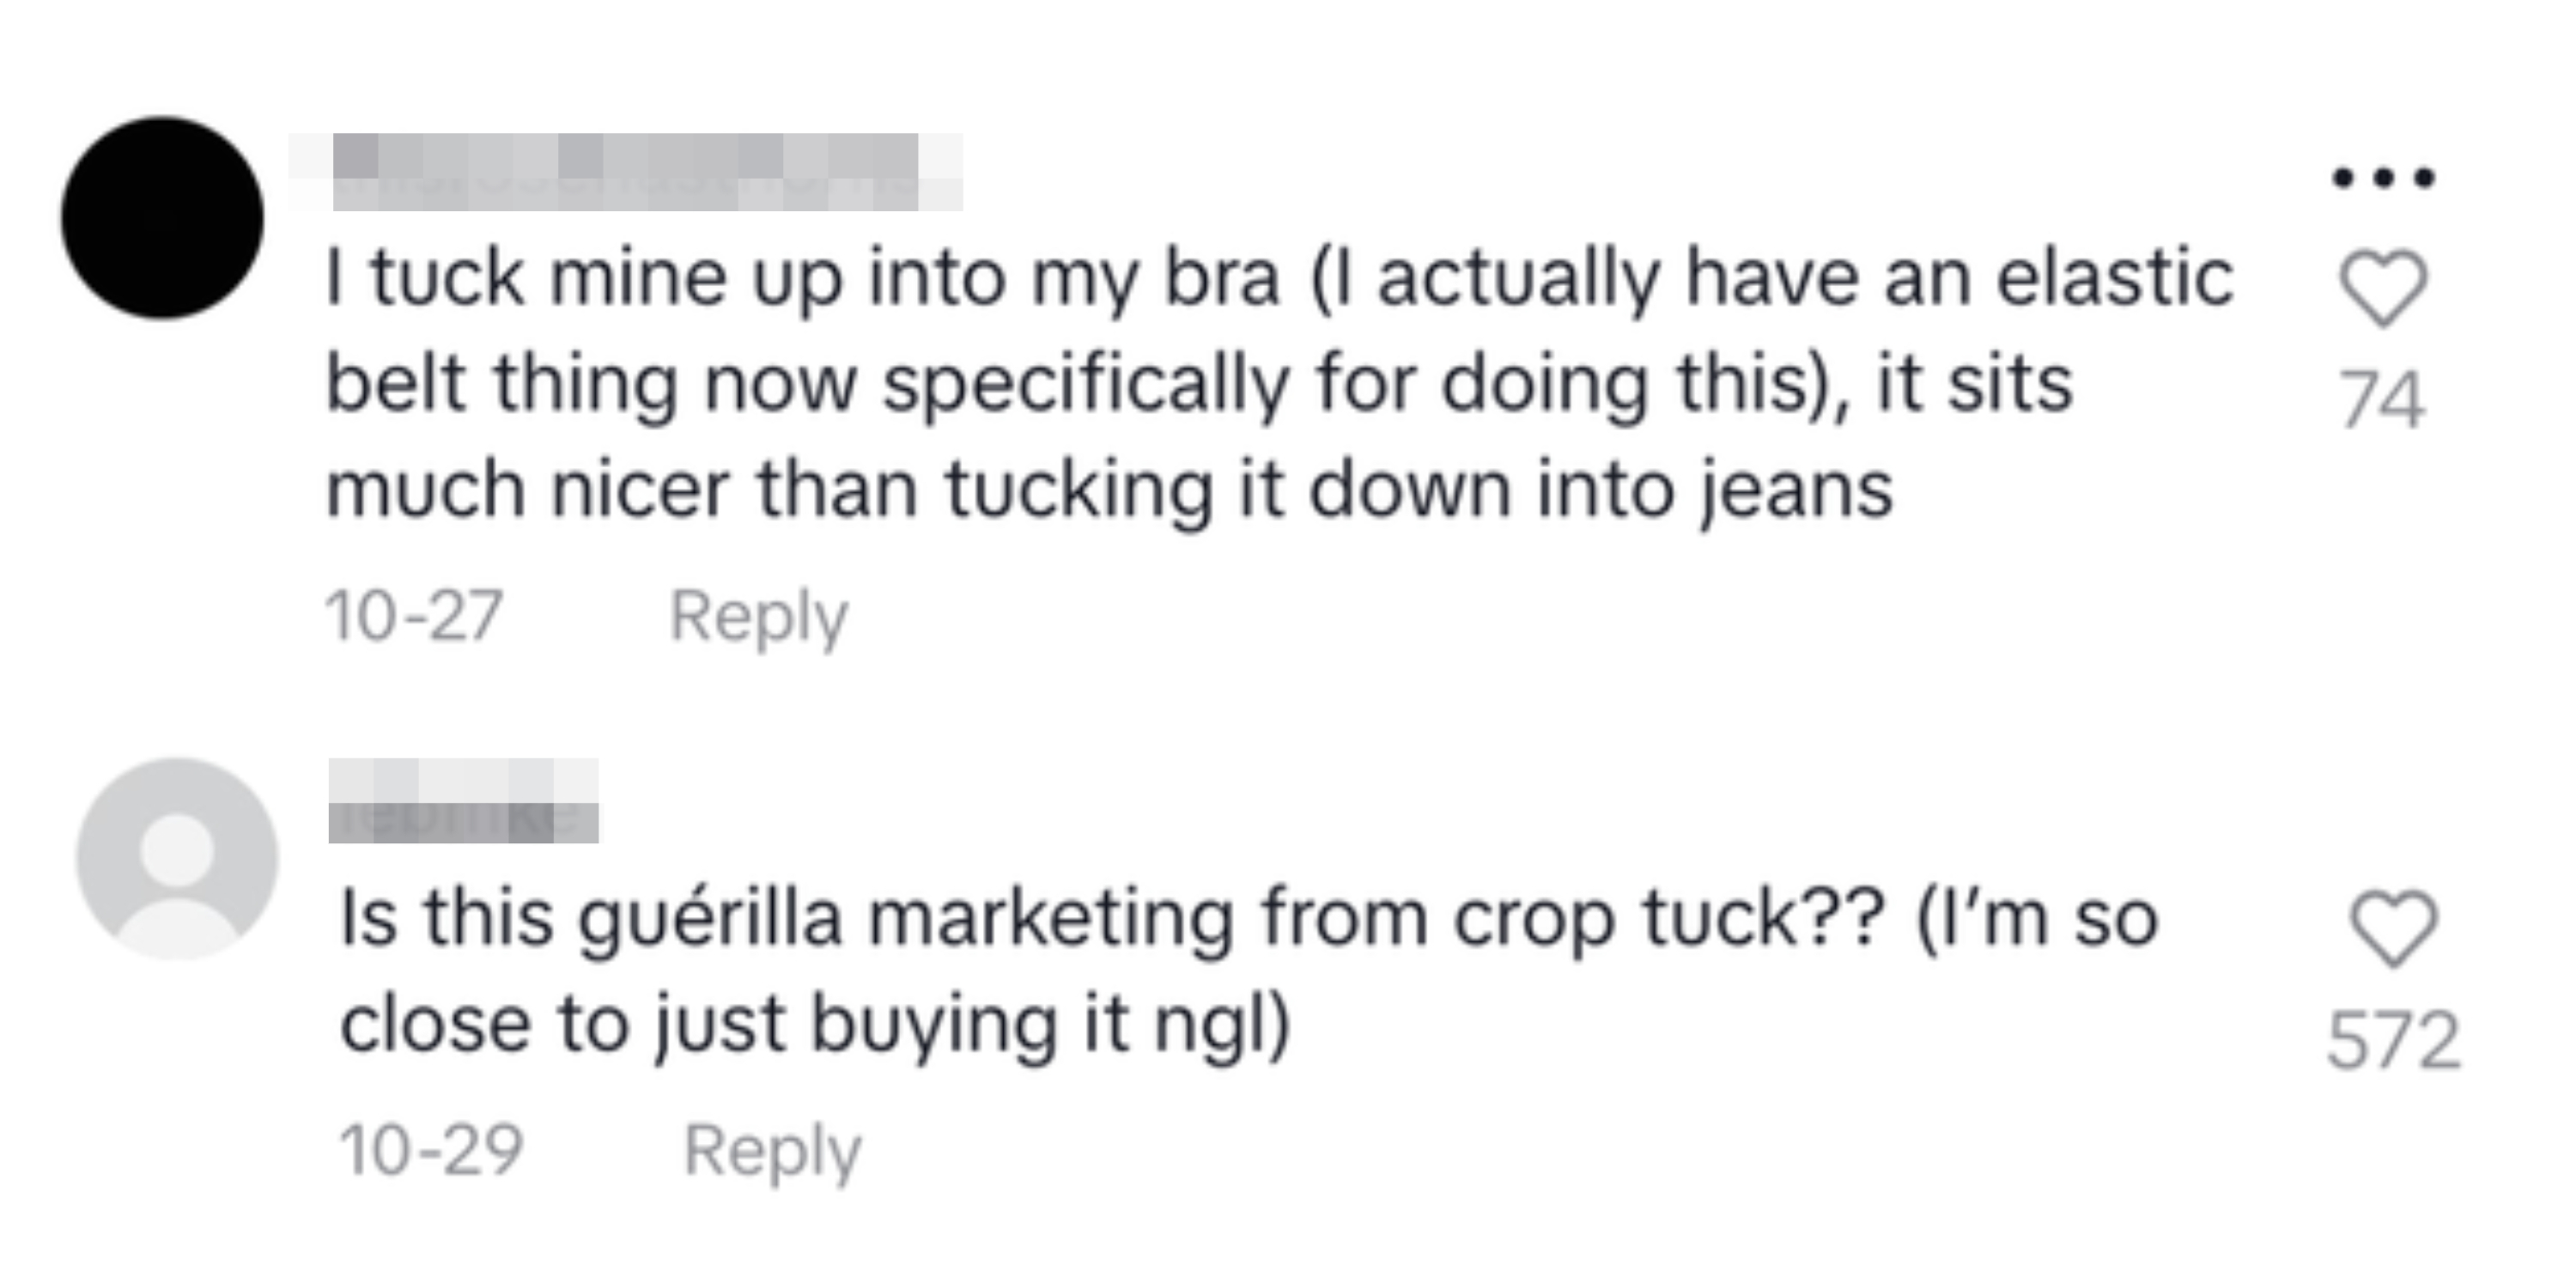 Commenters talking about the crop tuck